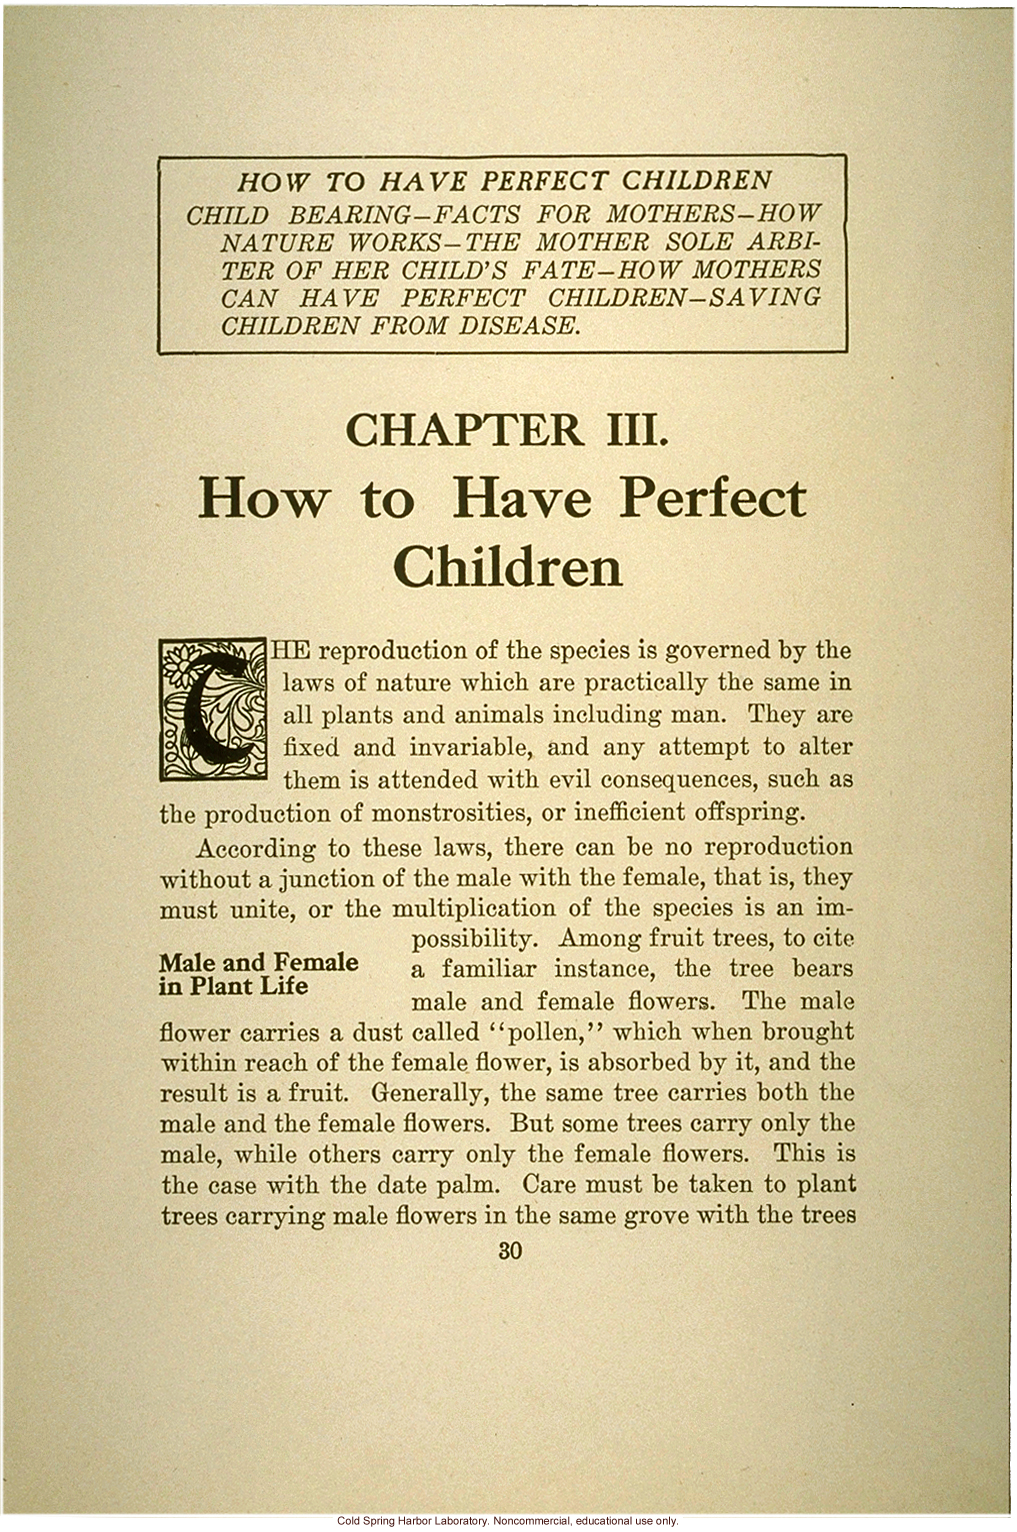 &quote;The science of eugenics and sex-life, love, marriage, maternity: the regeneration of the human race,&quote; by W.J. Hadden, C.H. Robinson, and M.R. Melendy